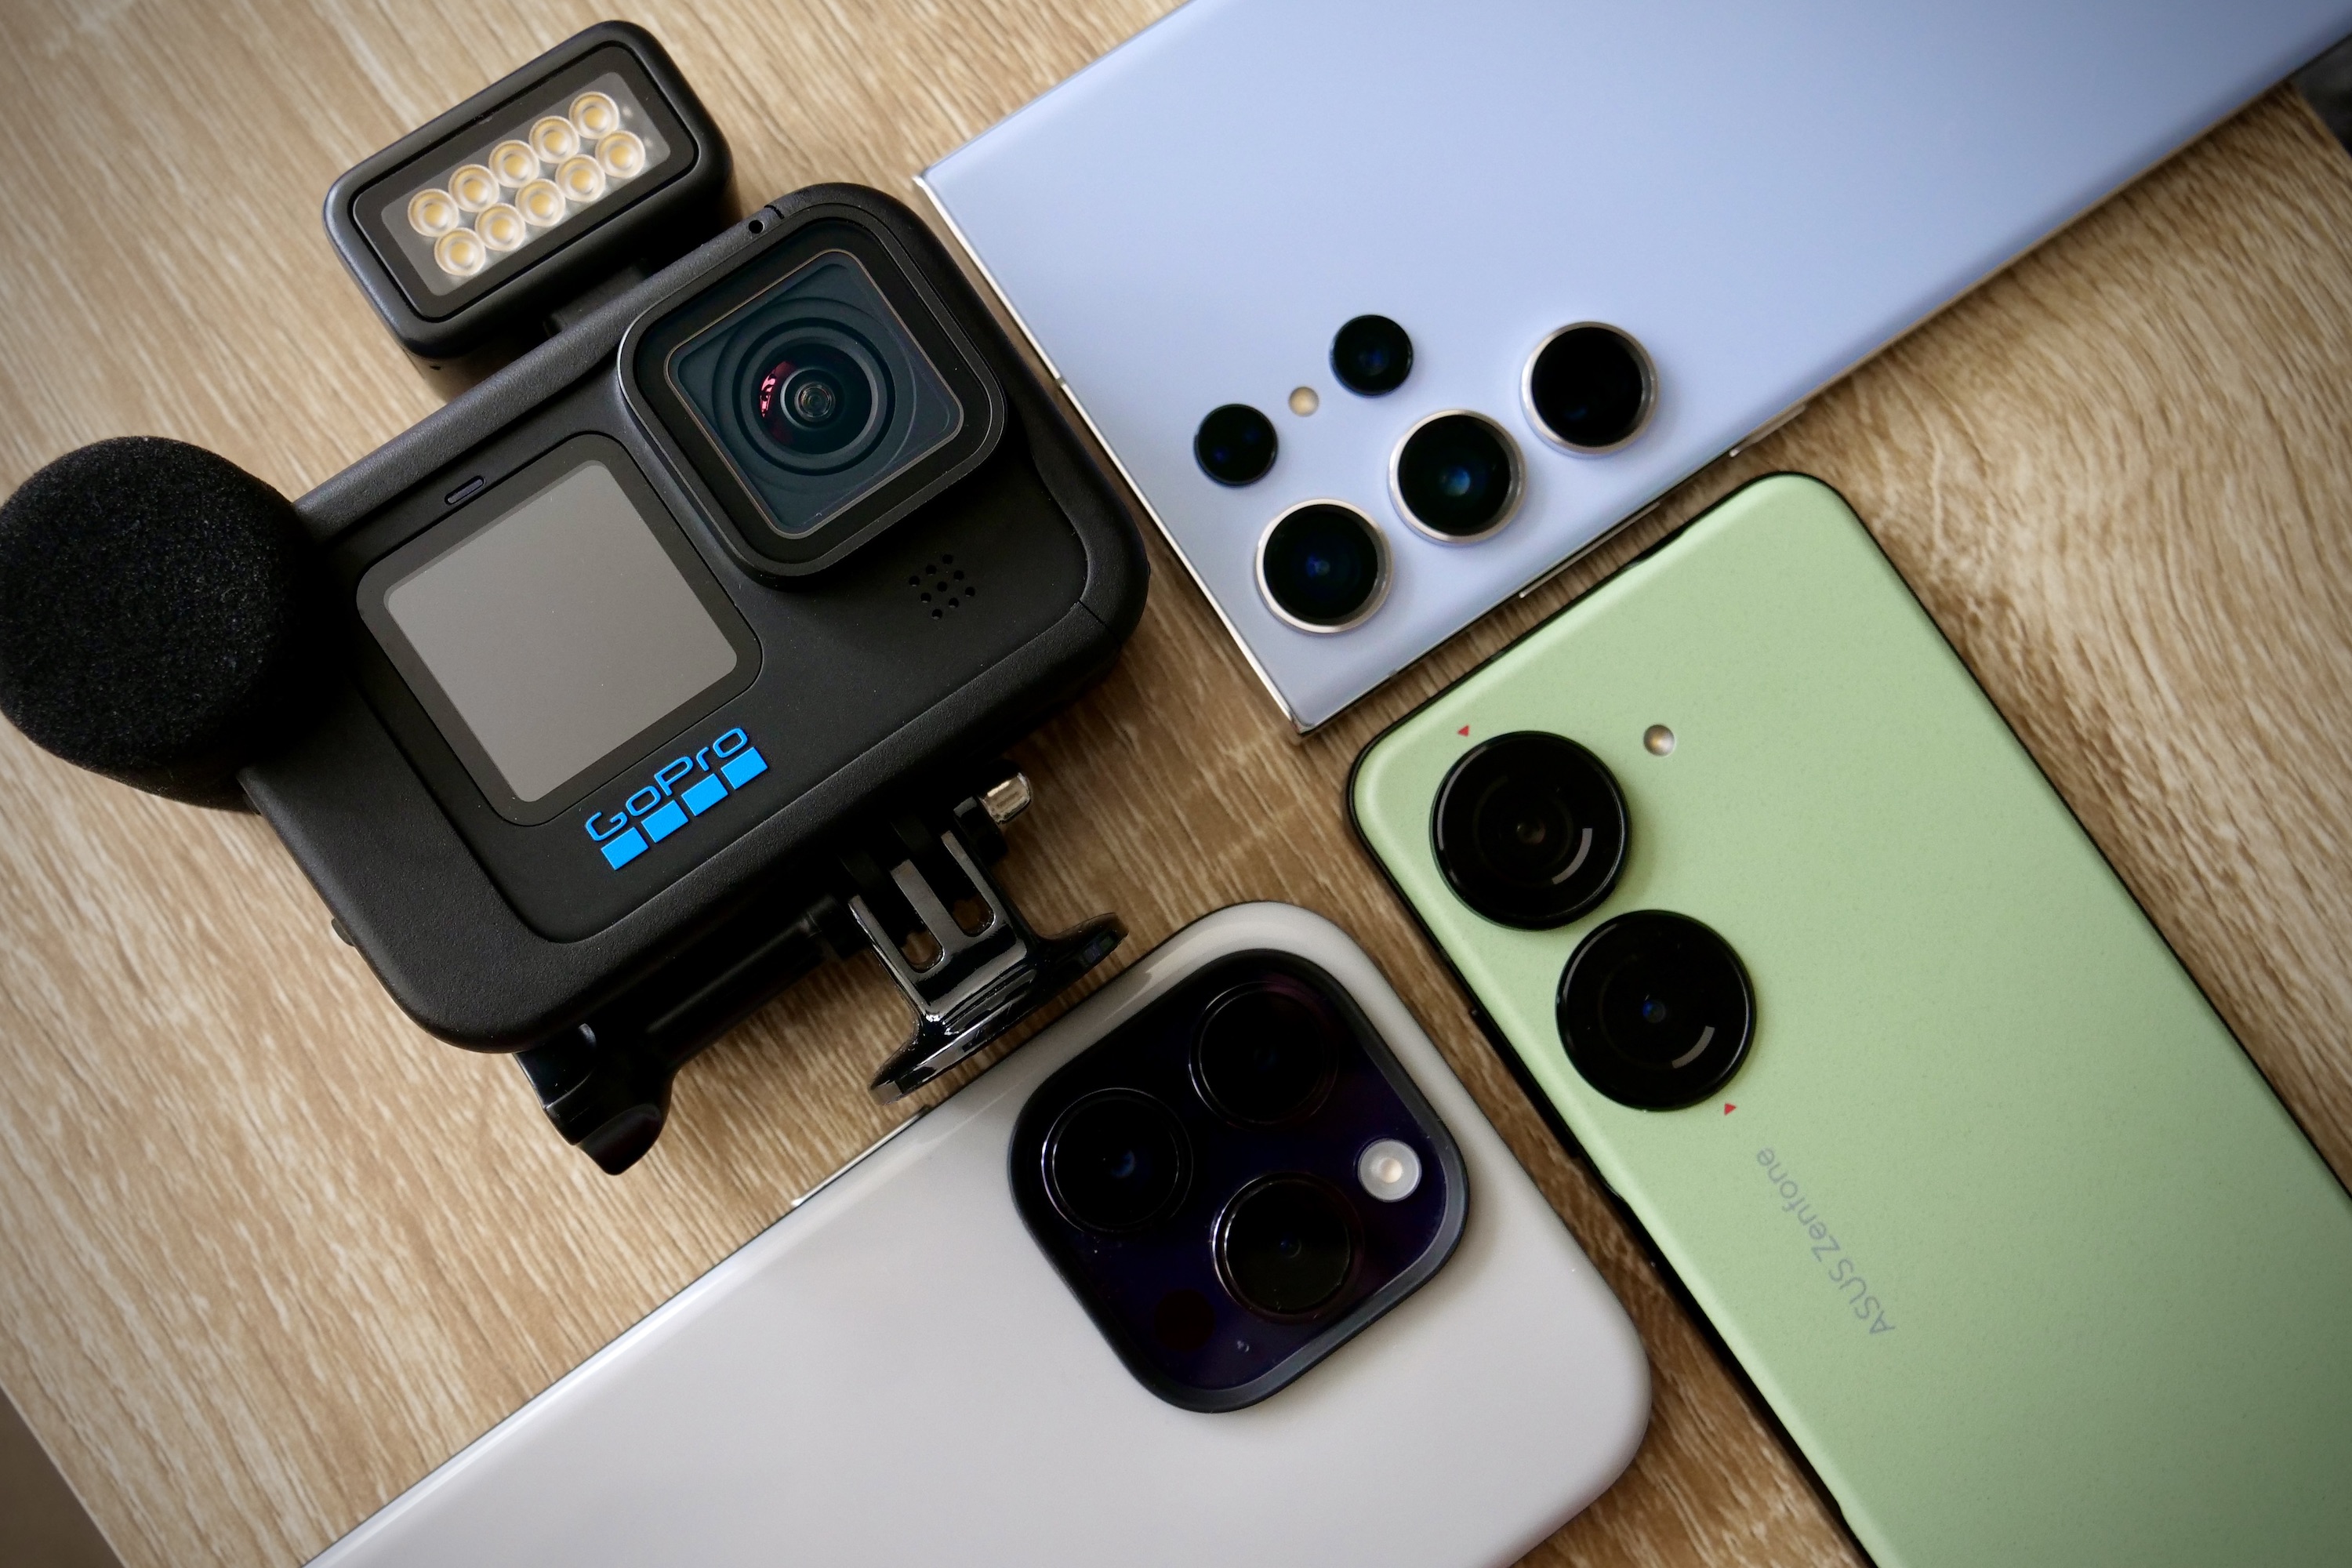 The Asus Zenfone 10, along with the Samsung Galaxy S23 Ultra, Apple iPhone 14 Pro, and the GoPro Hero 11 Black.